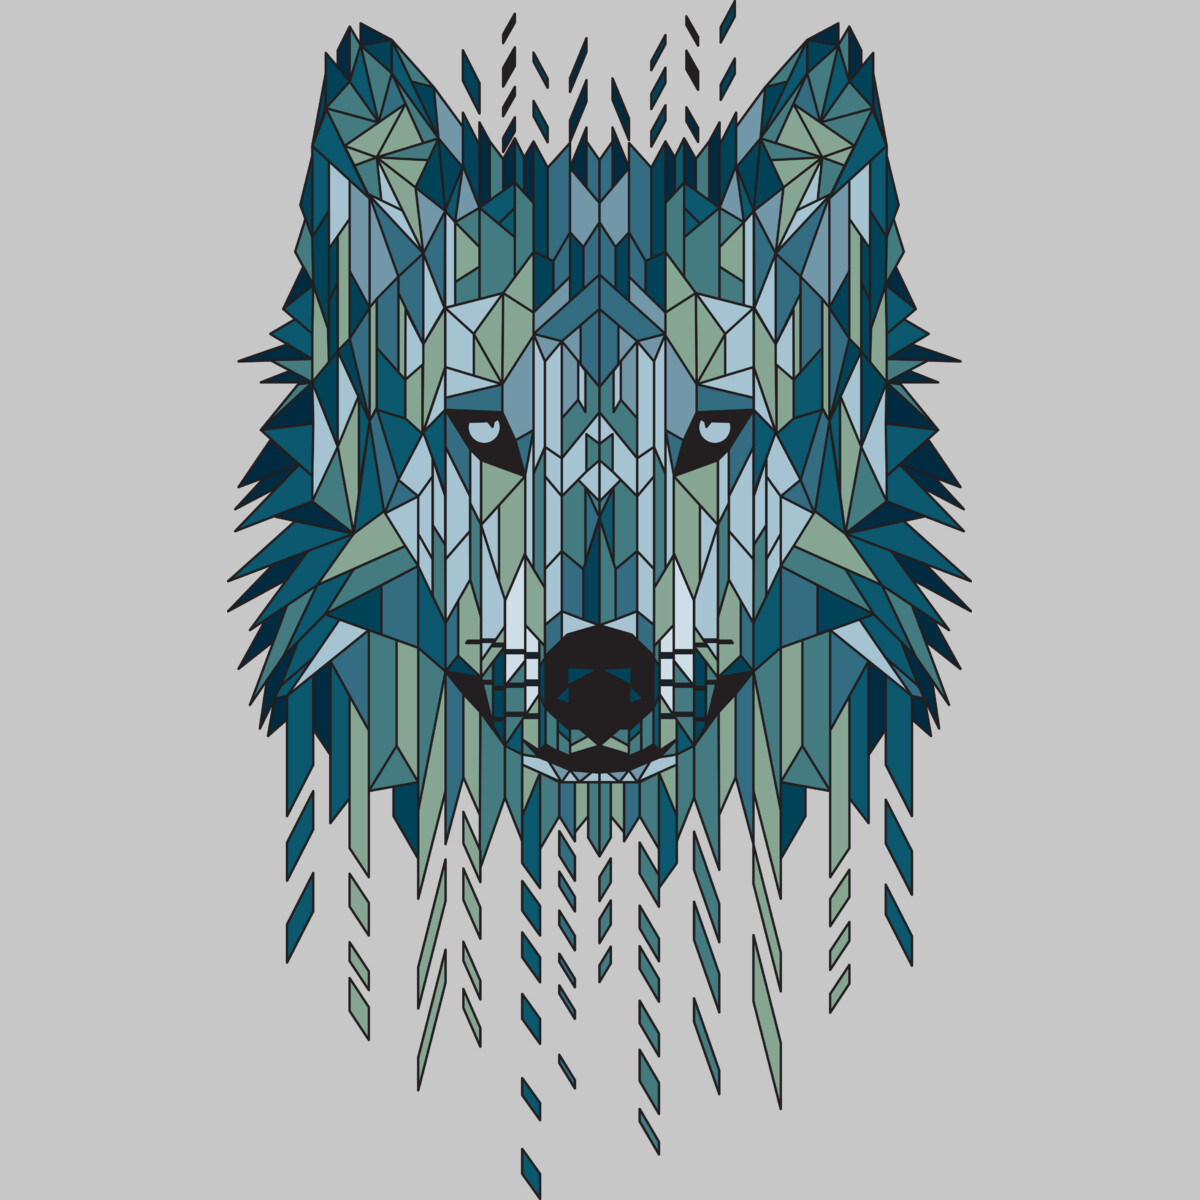 Geometric Wolf Mens Athletic Heather Cream Graphic Tee - Design By Humans  2XL - image 2 of 4